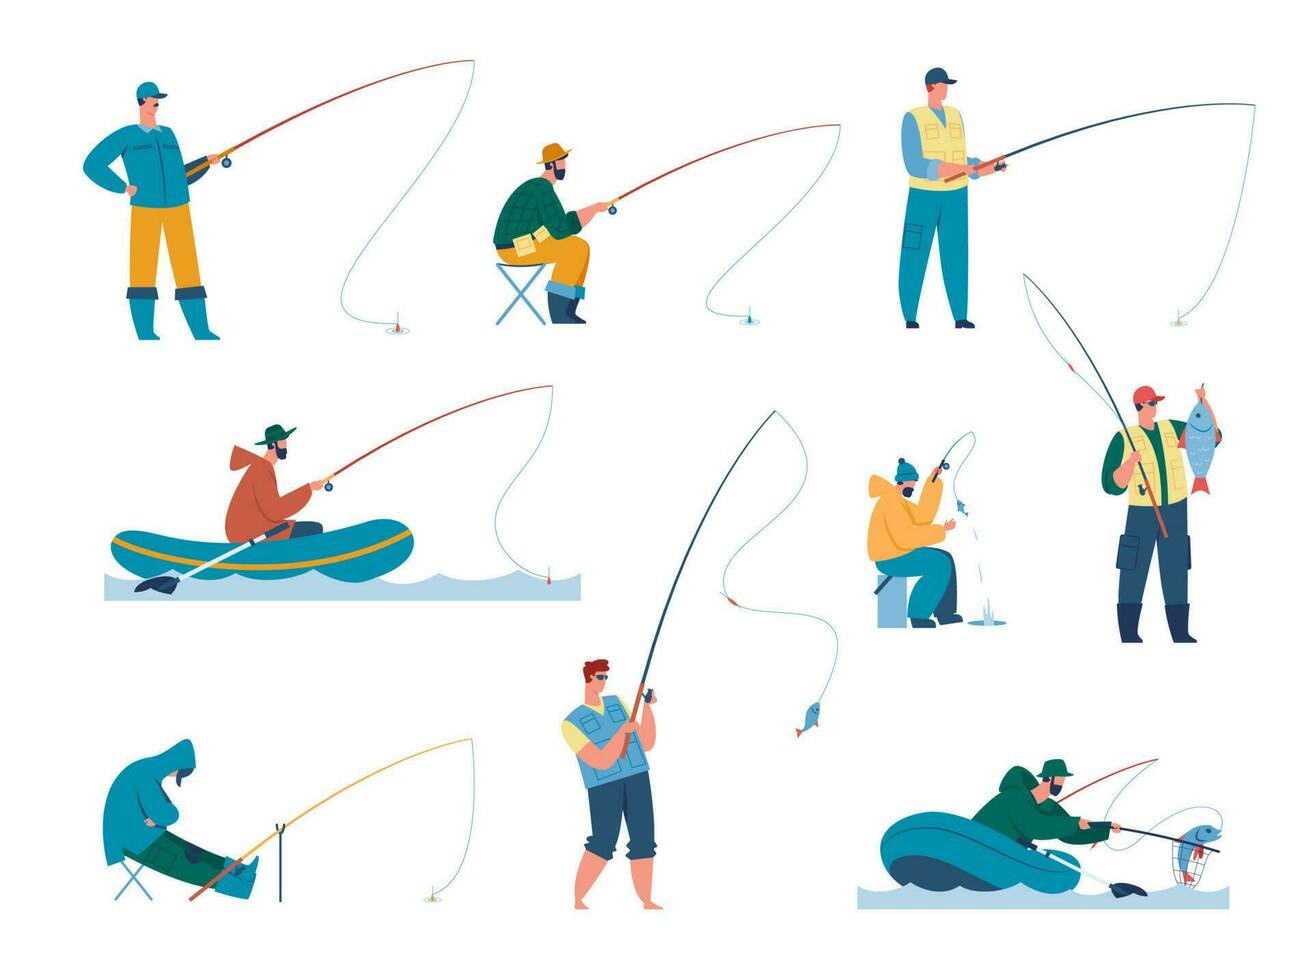 Fishermen catching fish with fishing rod, fisher characters. Fisherman fishing on boat, outdoor summer recreation activity vector set